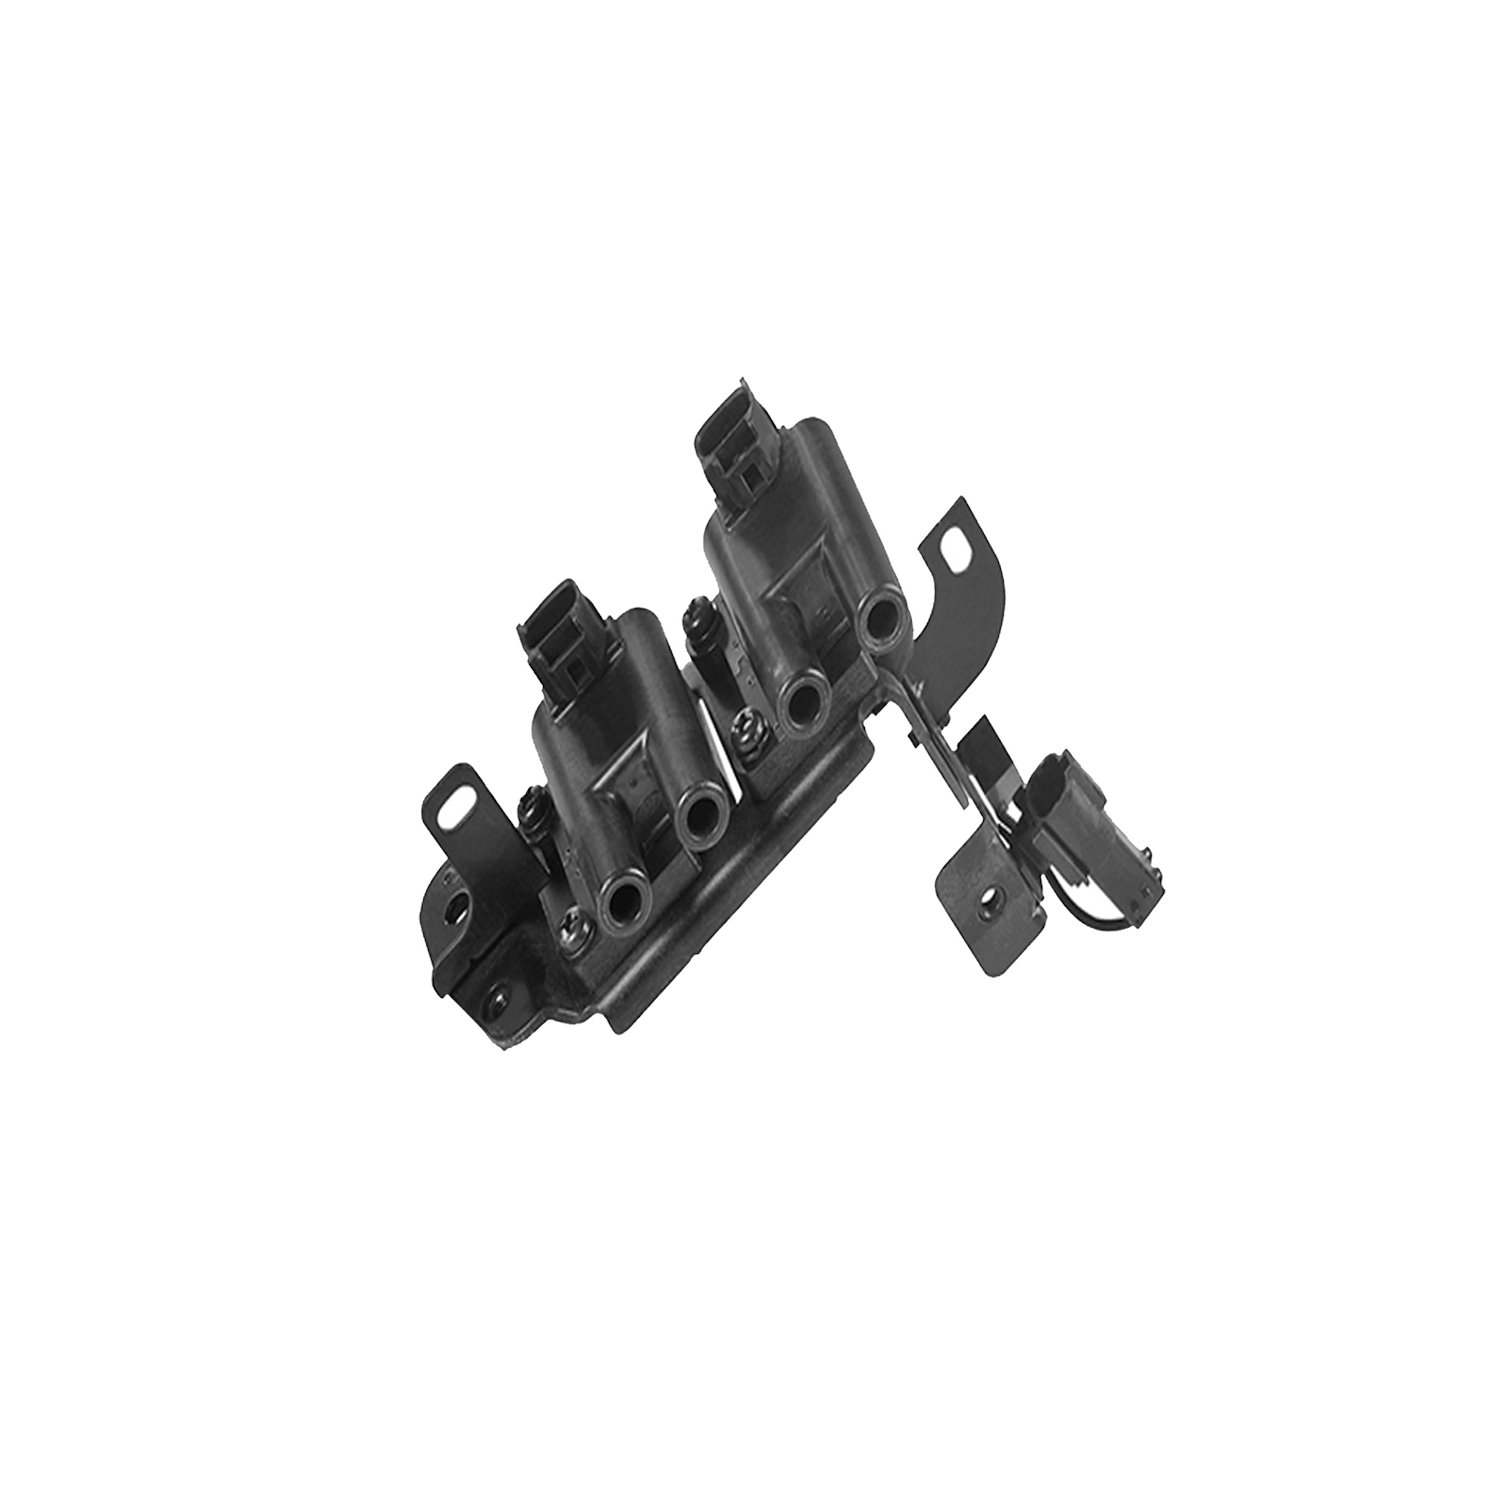 OE Replacement Ignition Coil for 2001-2005 Hyundai Accent